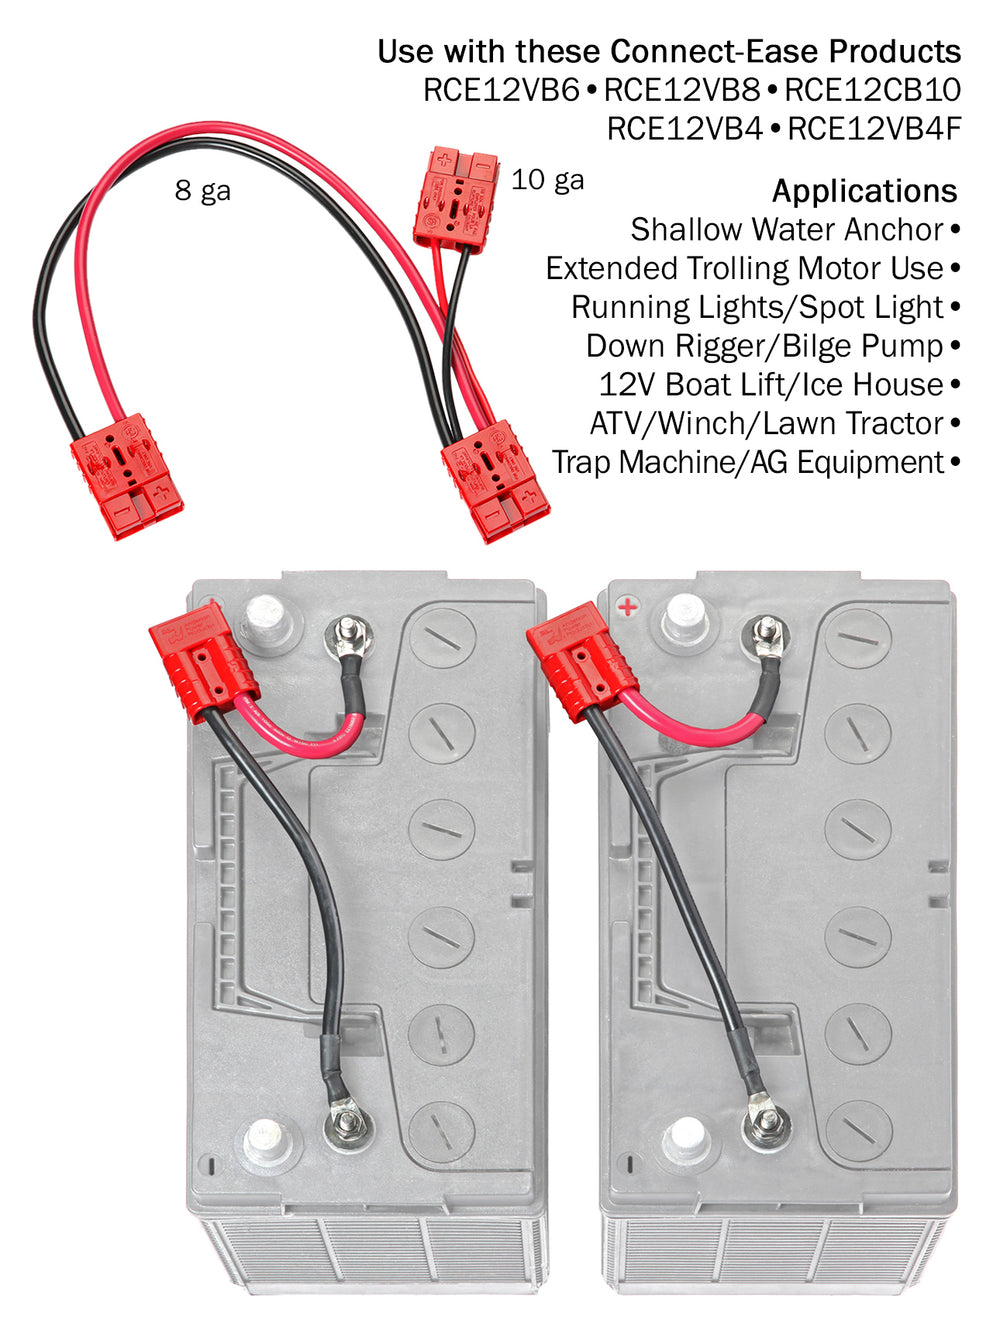 12 Volt Parallel Battery Connection Kit (RCE12VBPK) - Connect-Ease. Connect all your marine equipment with ease.